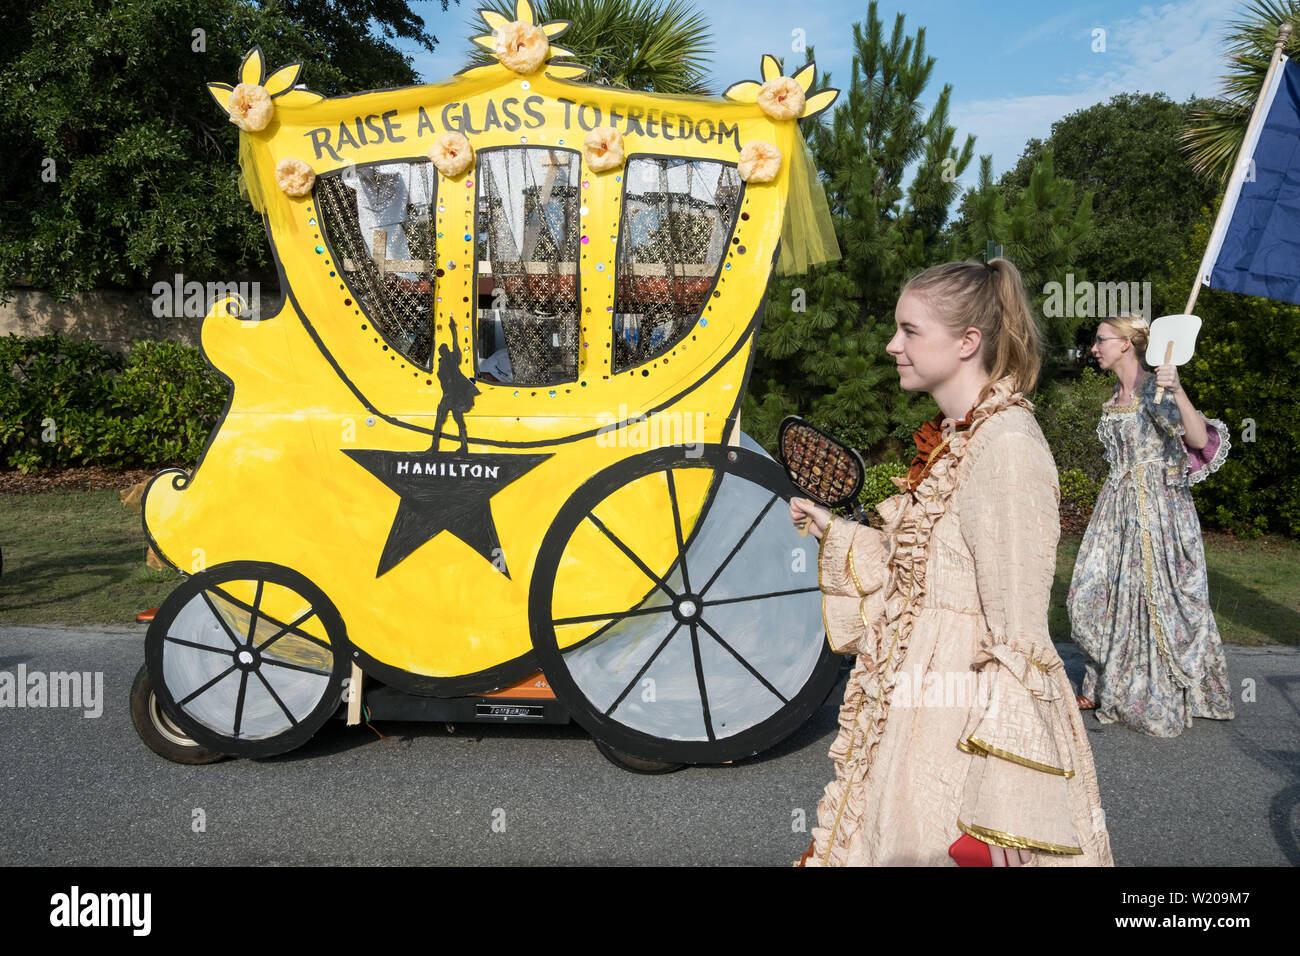 Sullivans Island South Carolina, USA. 4th July, 2019. Women wearing colonial costume walk alongside a golf cart decorated as a horse carriage during the annual Independence Day parade July 4, 2019 in Sullivan's Island, South Carolina. The tiny affluent Sea Island beach community across from Charleston holds an outsized golf cart parade featuring more than 75 decorated carts. Credit: Planetpix/Alamy Live News Stock Photo